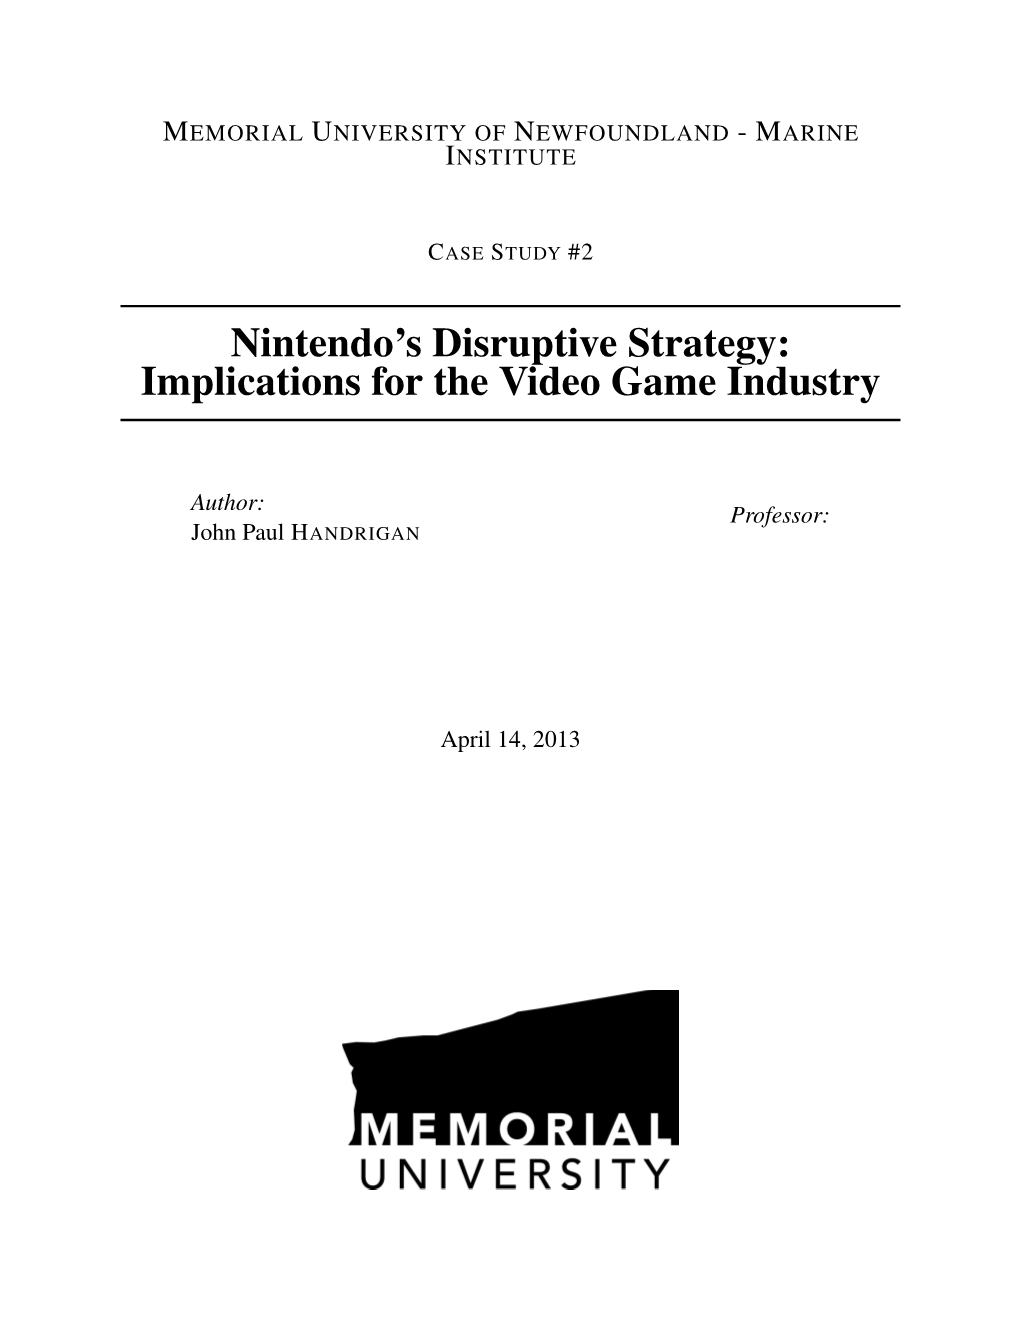 Nintendo's Disruptive Strategy: Implications for the Video Game